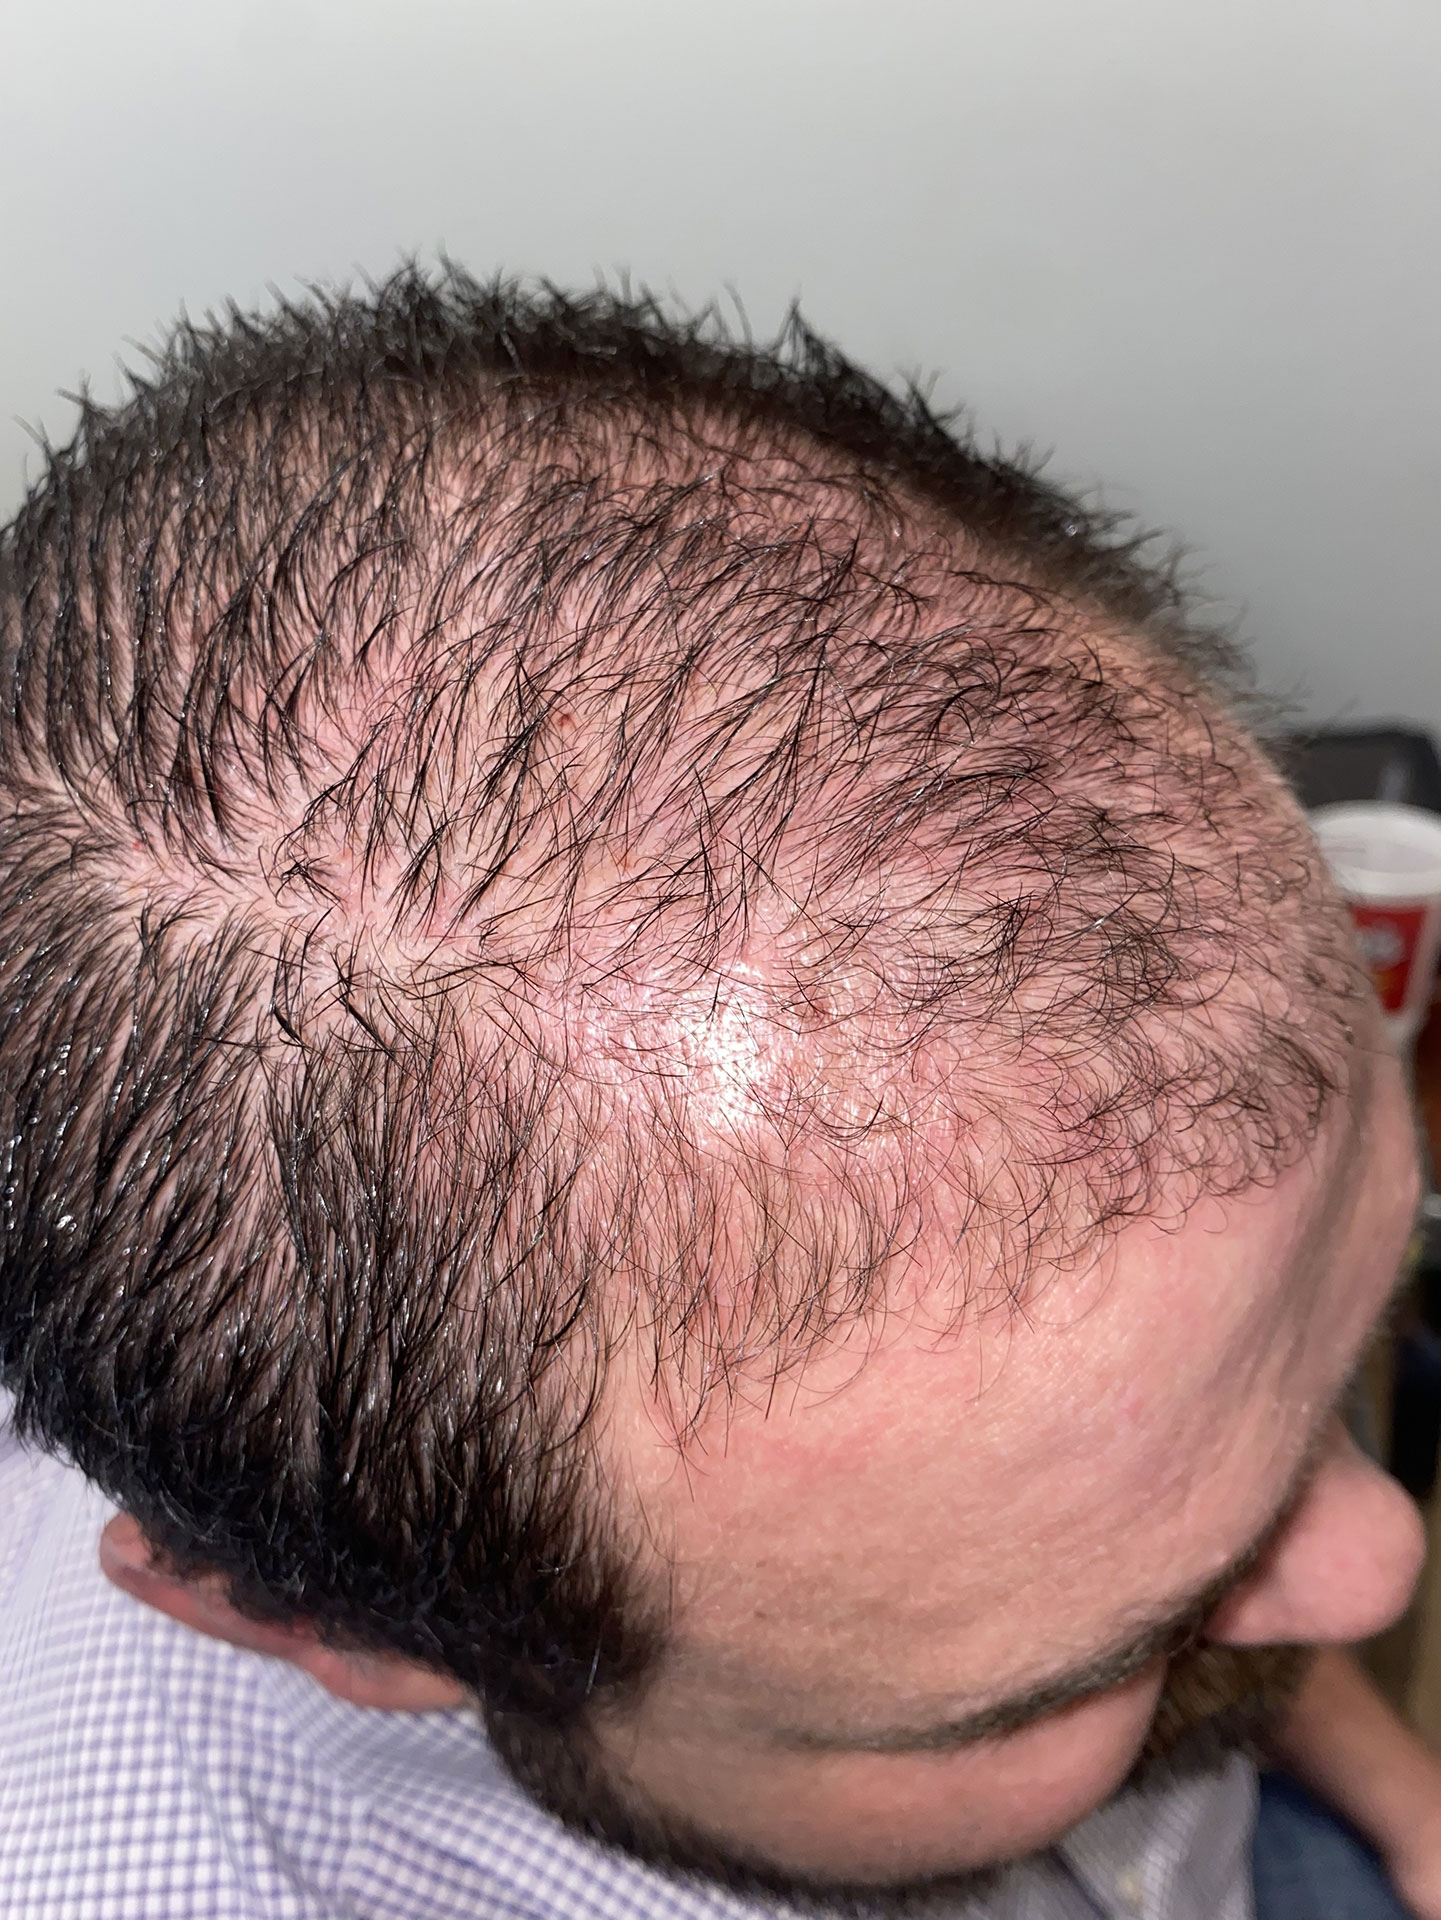 Top of a person's head before hair treatment